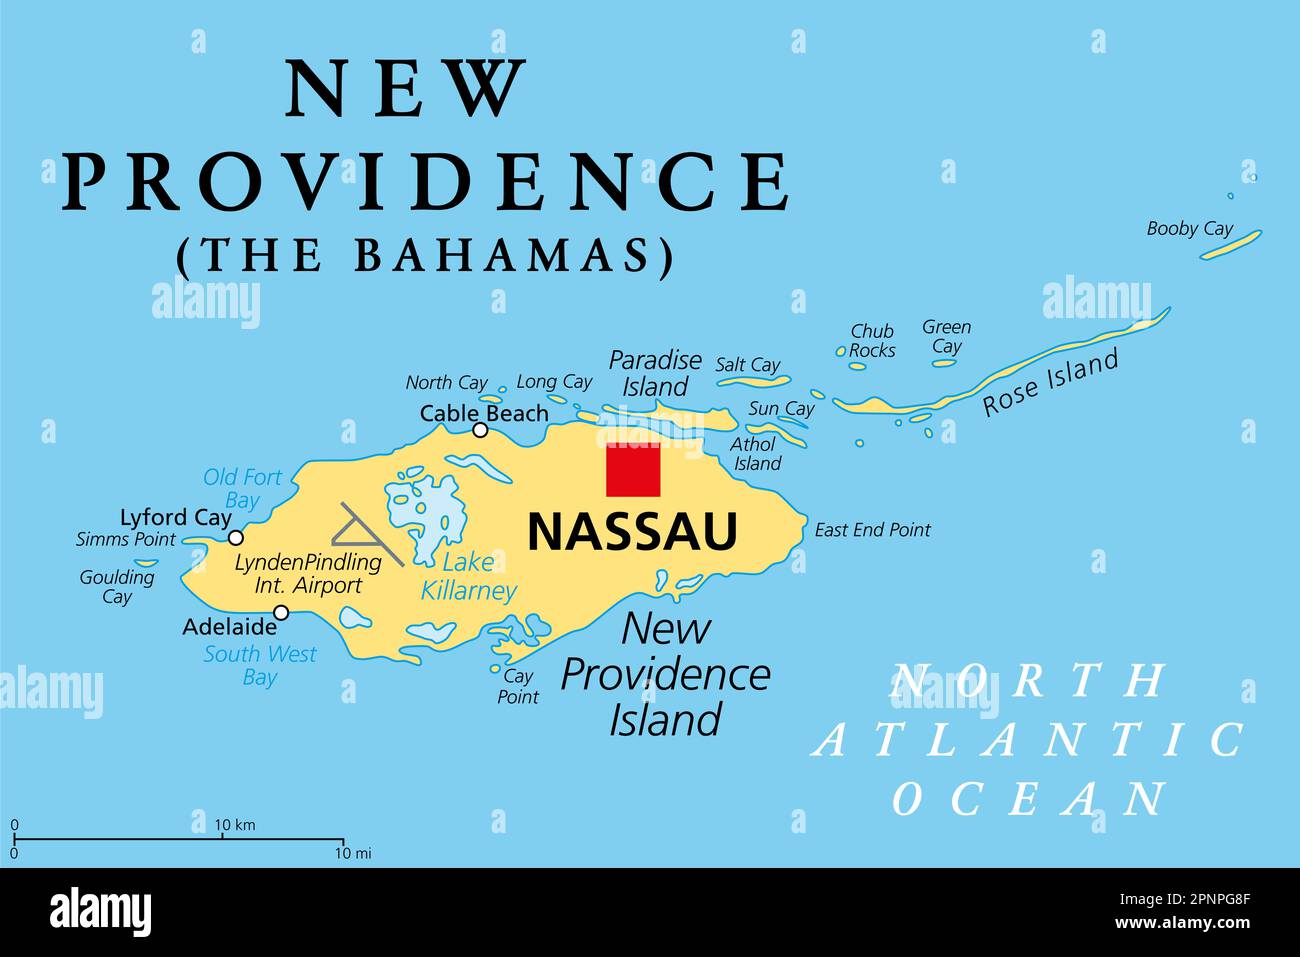 New Providence Island, political map, with Nassau, the capital of The Bahamas, an island country within the West Indies in the North Atlantic. Stock Photo